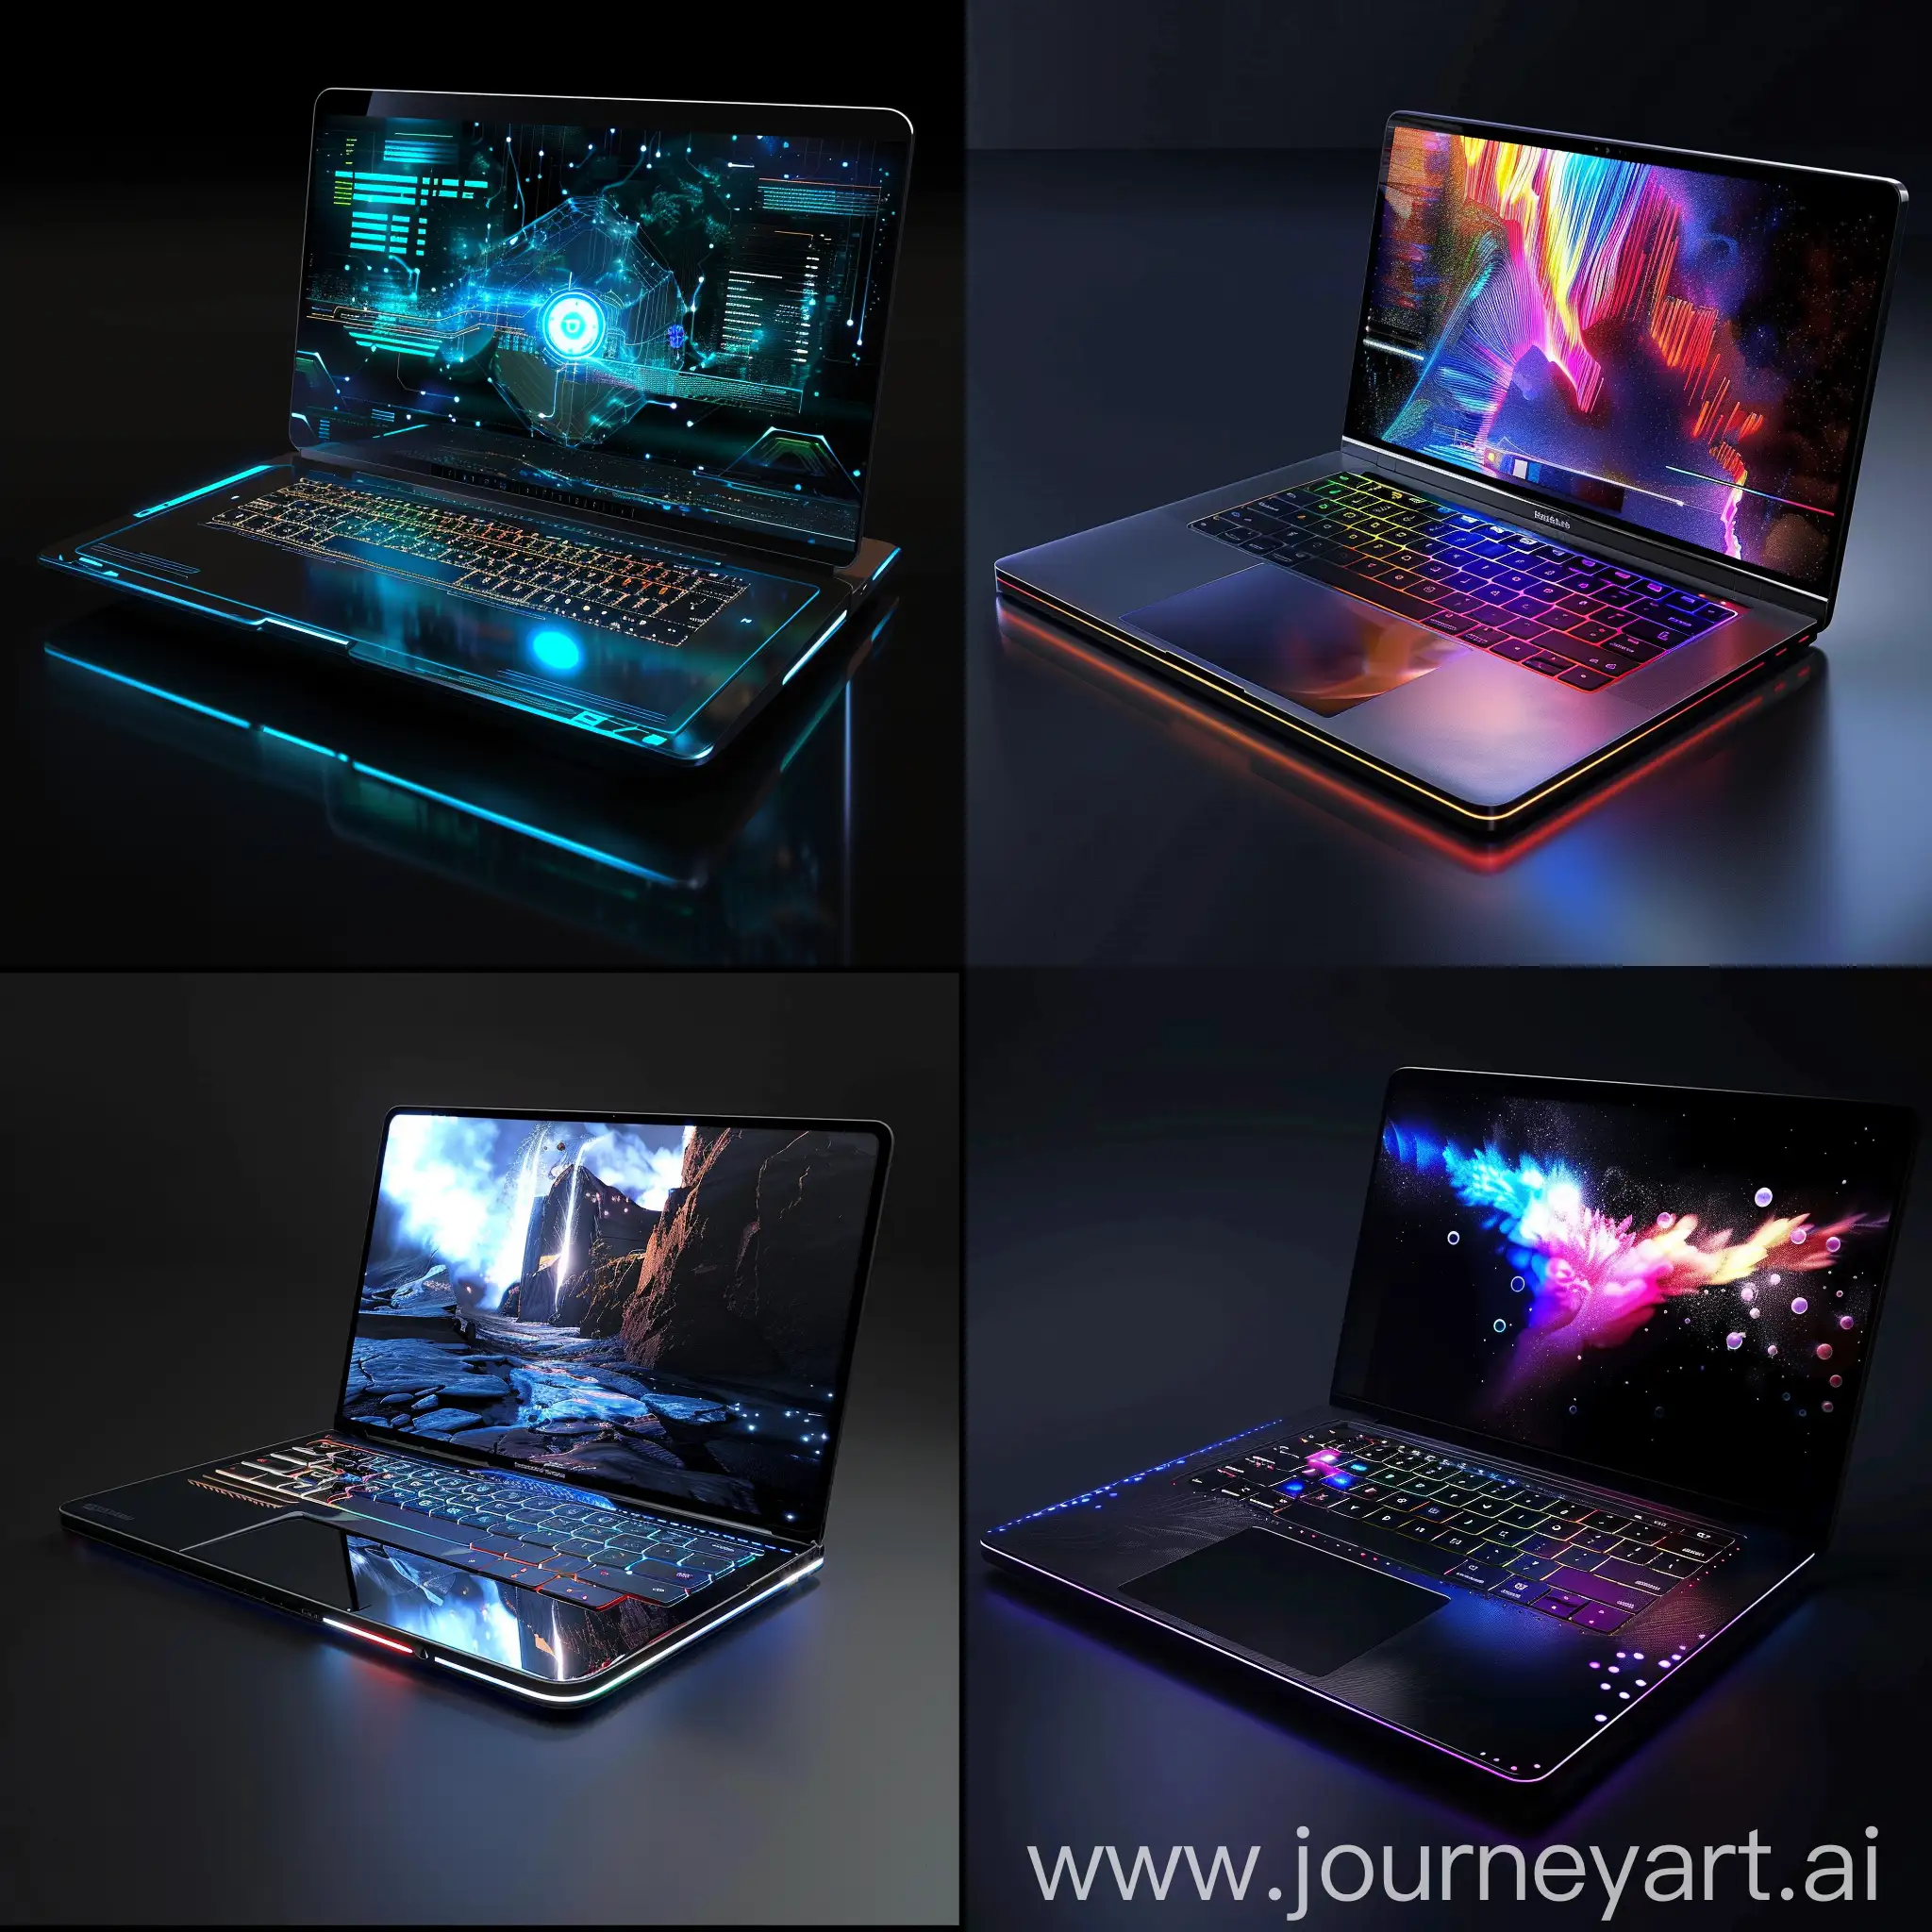 Futuristic-Laptop-with-Modular-Components-and-Quantumdot-Display